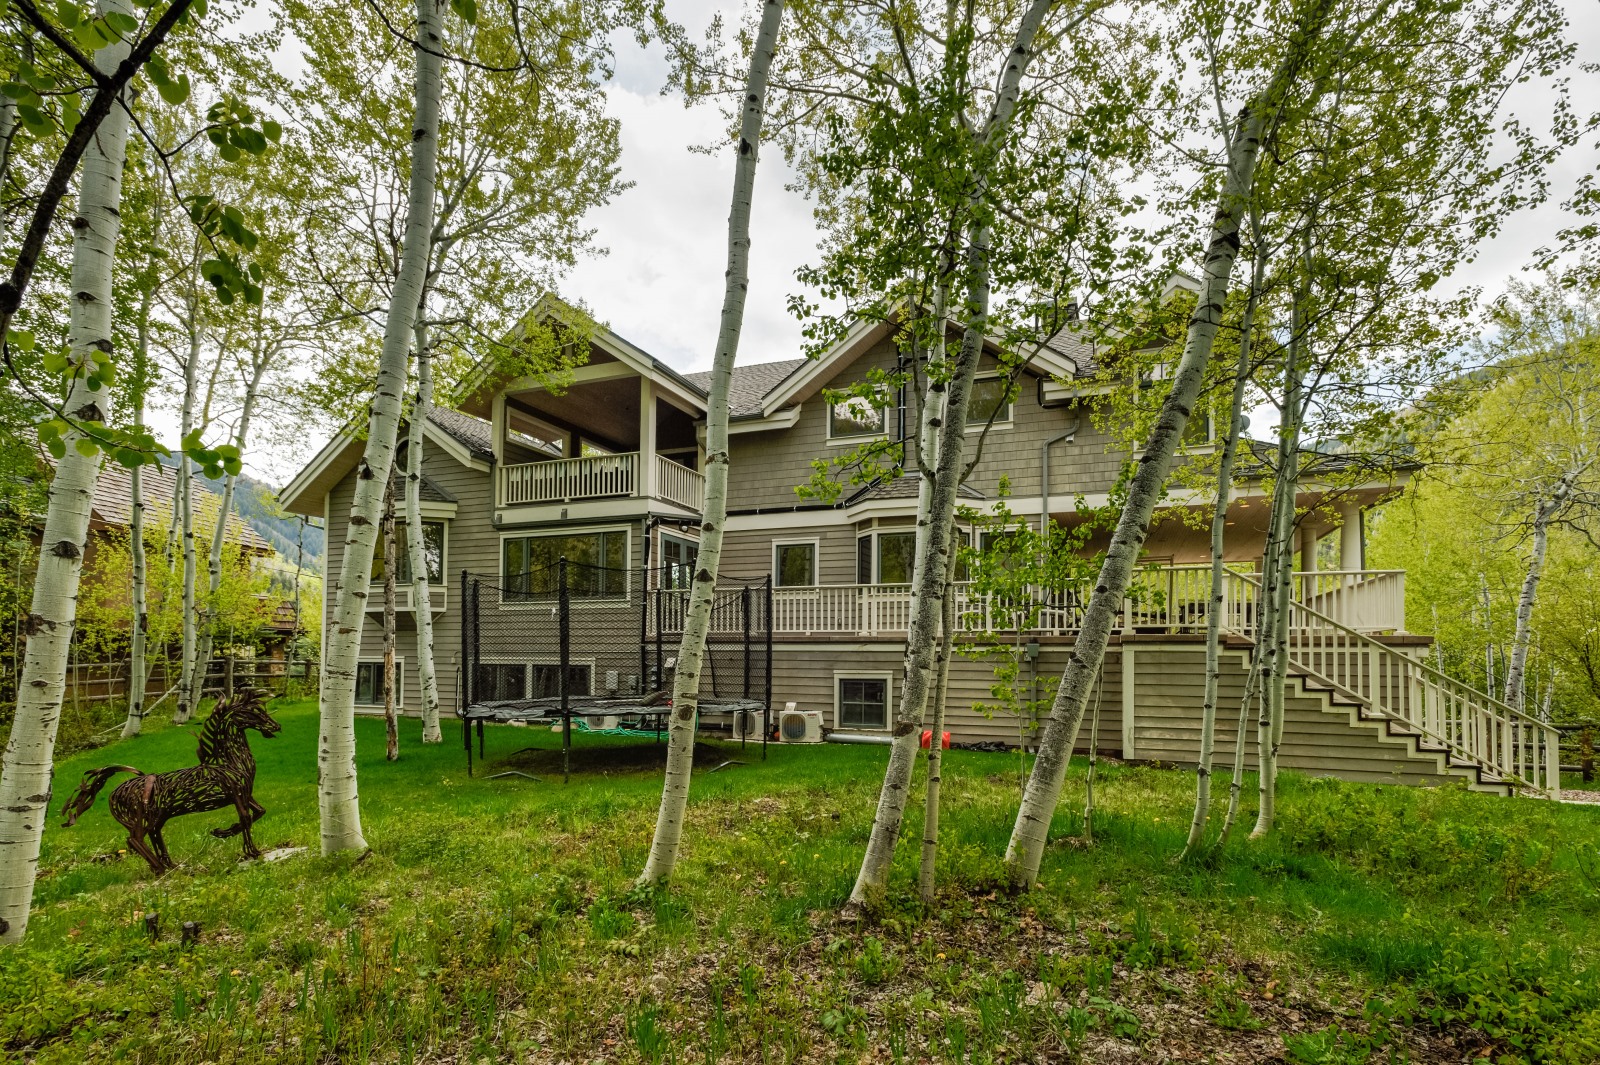 Contemporary designed mountain home just minutes from Aspen's downtown core